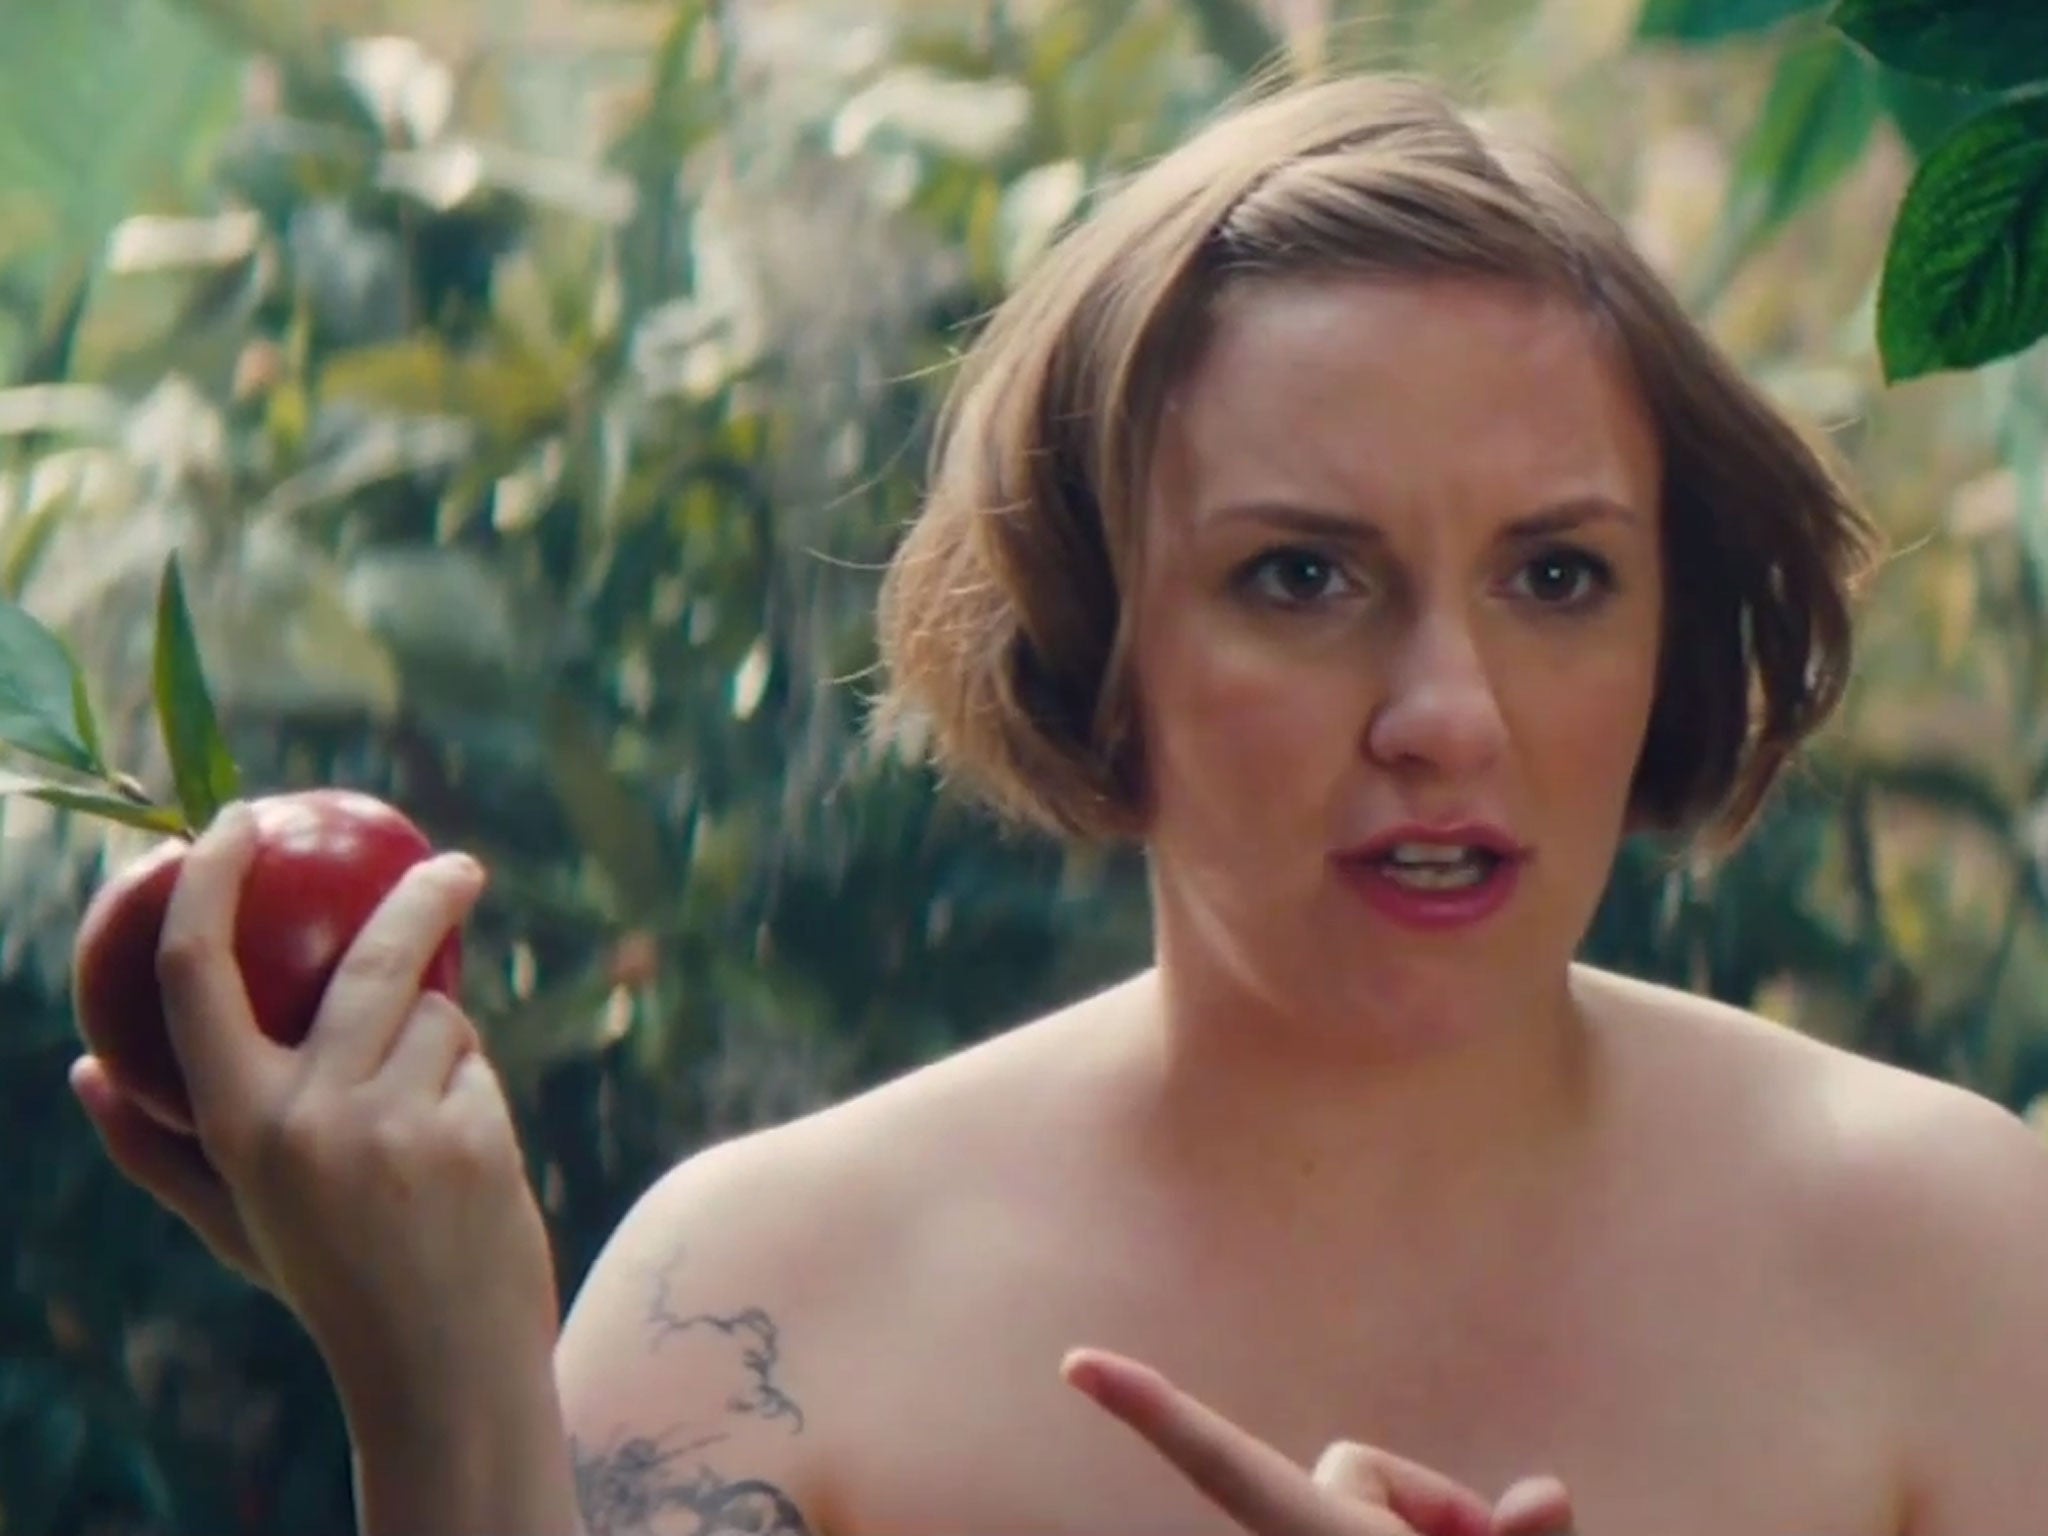 Lena Dunham stripped to her birthday suit to play Eve in a Girls spoof on Saturday Night Live